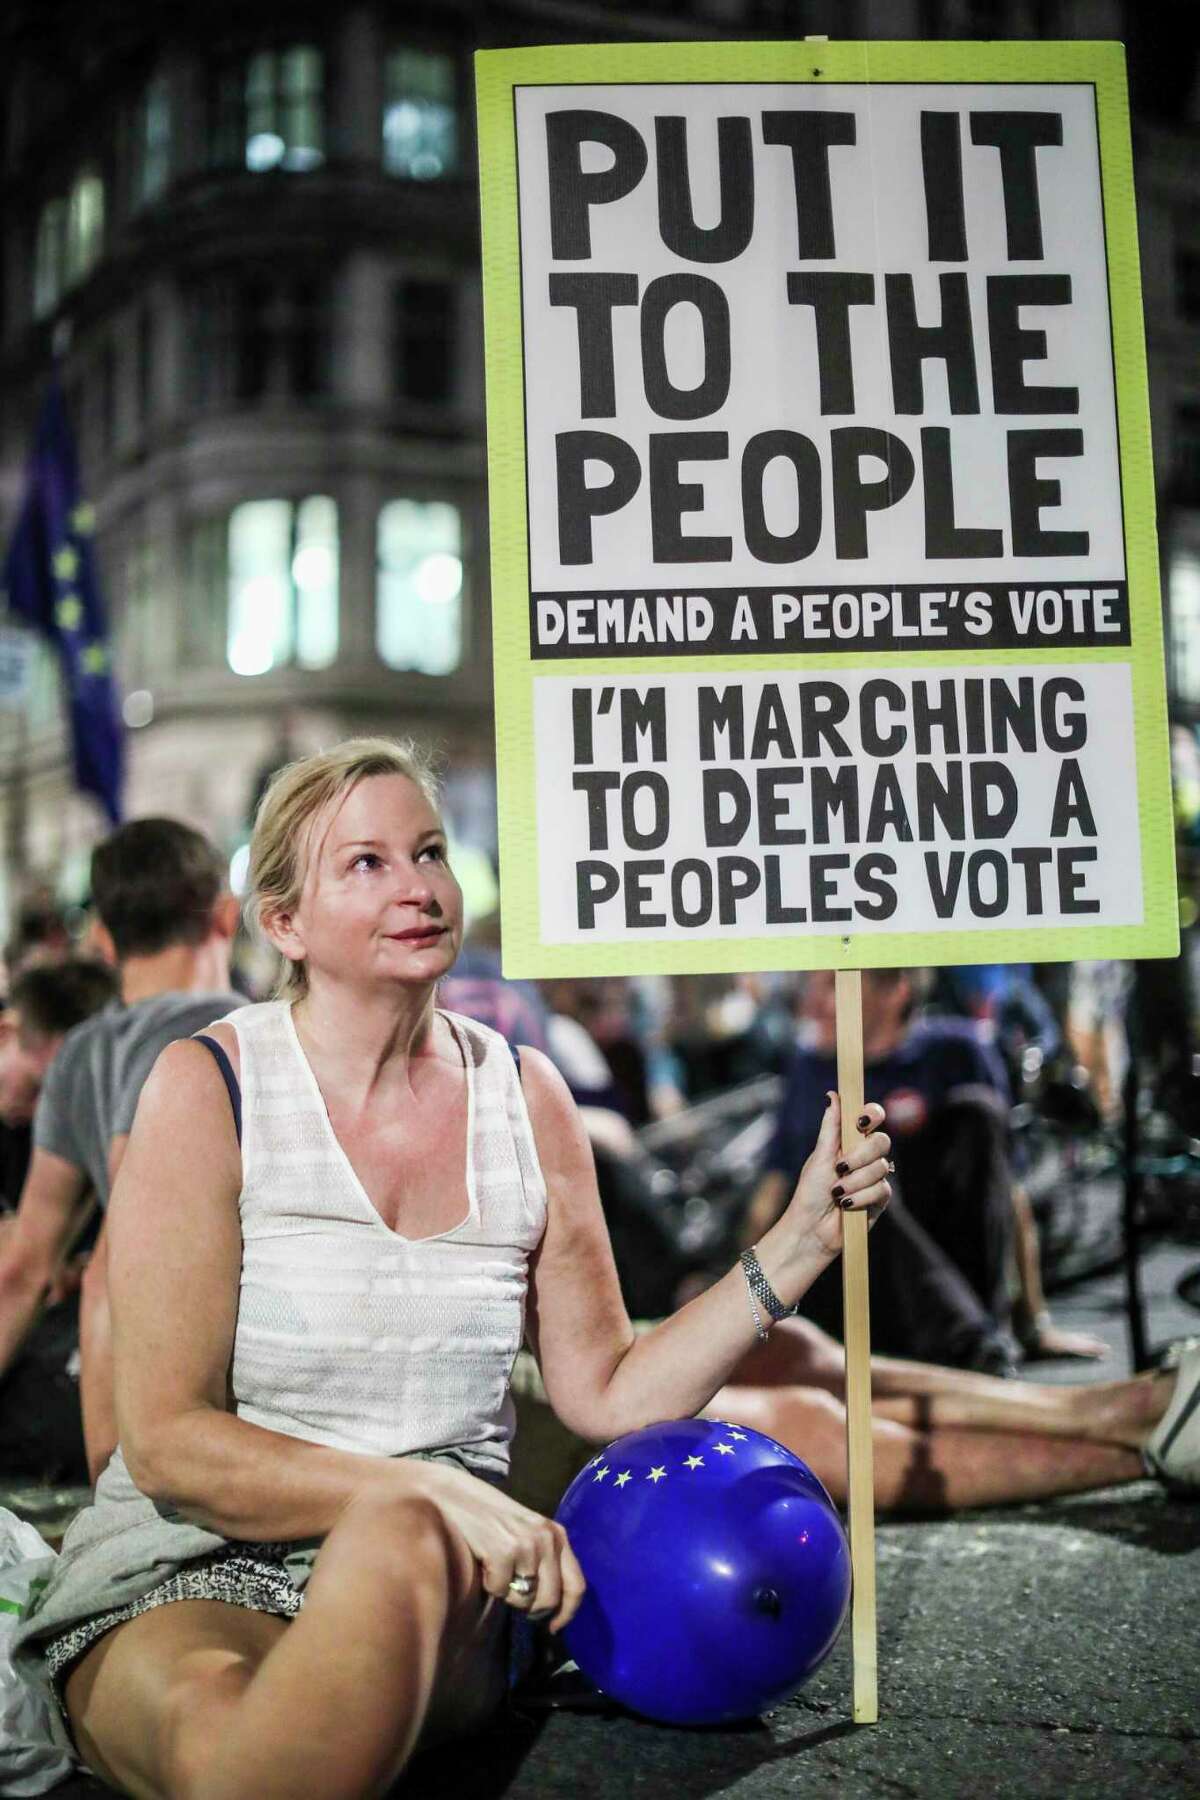 Anti-Brexit supporters continue to participate in a late evening protest in front of the Houses of Parliament in central London, Wednesday, Aug. 28, 2019. British Prime Minister Boris Johnson maneuvered on Wednesday to give his political opponents even less time to block a no-deal Brexit before the Oct. 31 withdrawal deadline, winning Queen Elizabeth II's approval to suspend Parliament. (AP Photo/Vudi Xhymshiti)